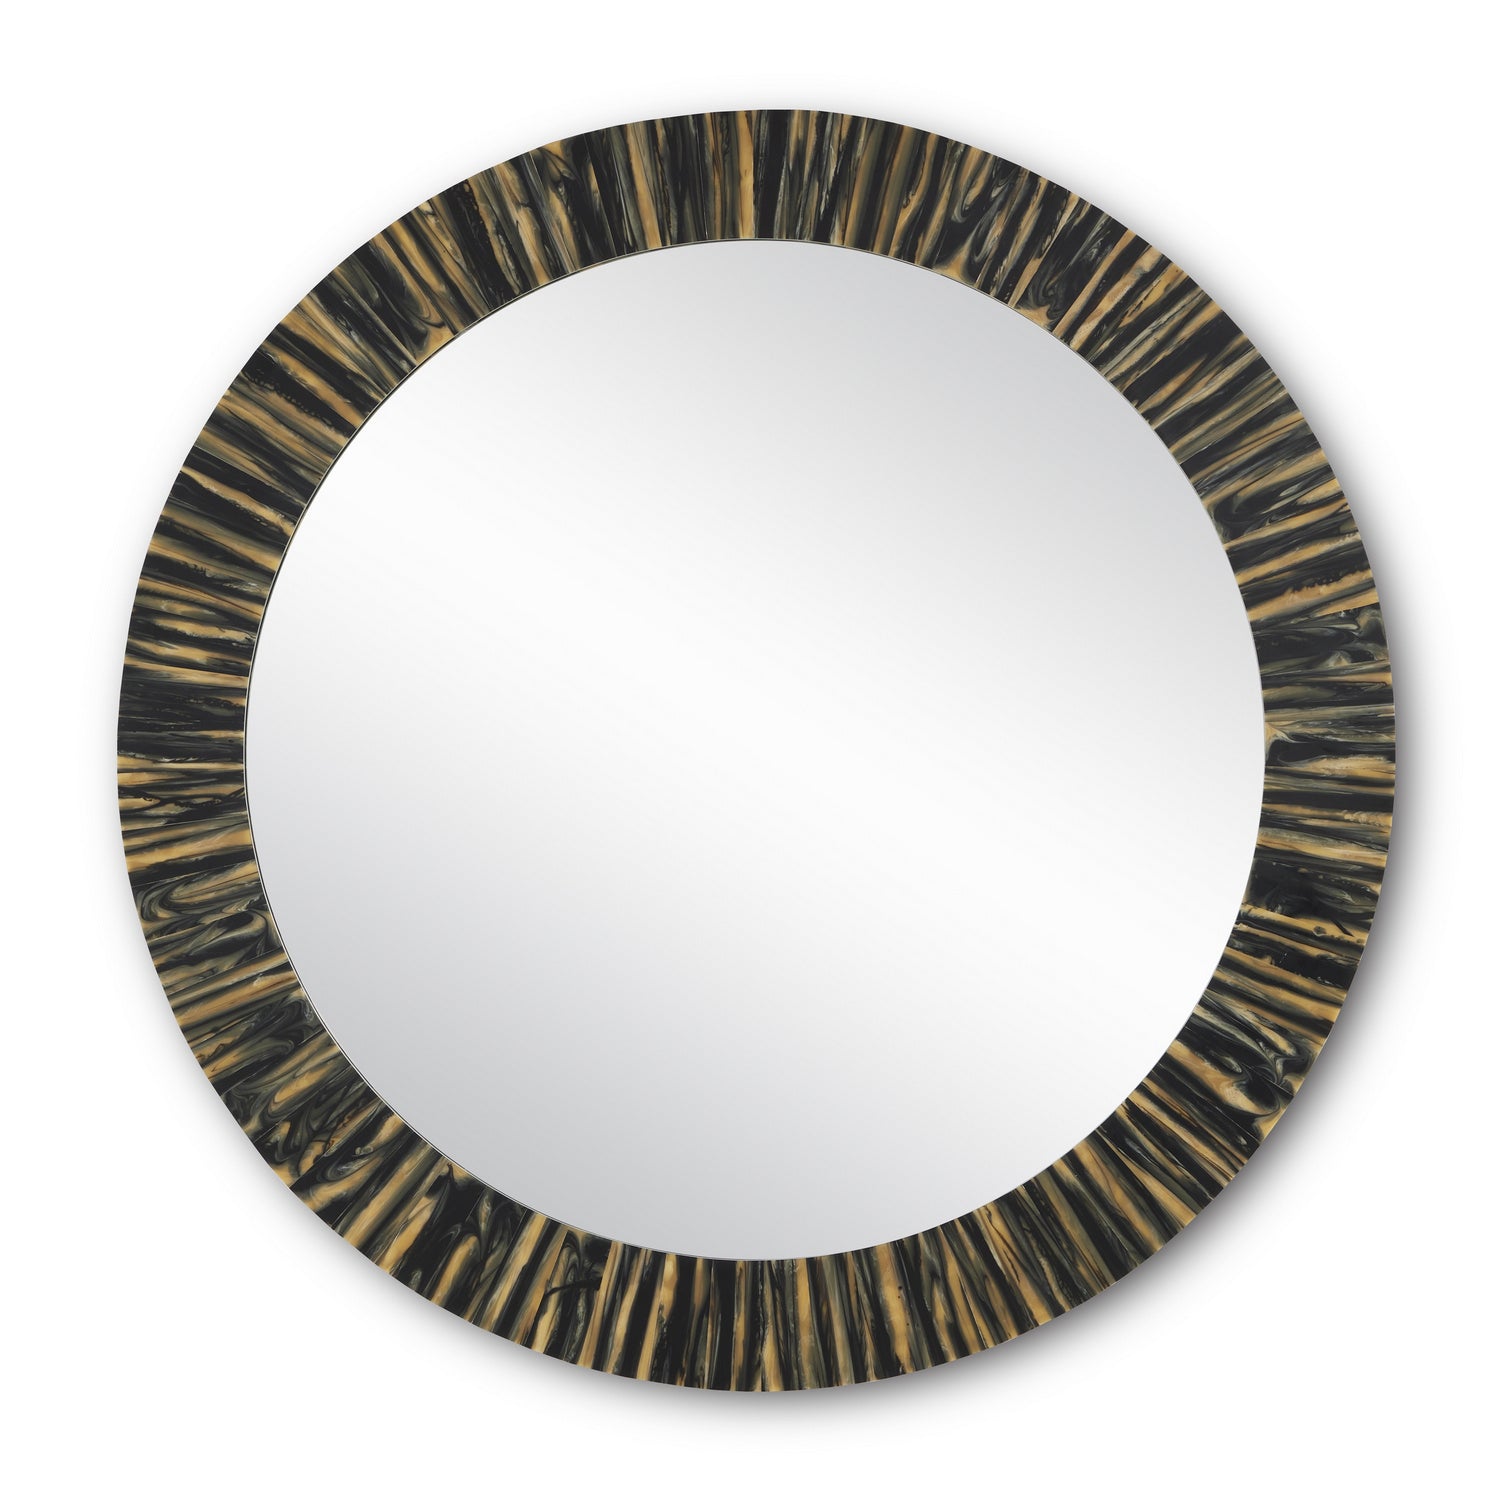 Mirror from the Kuna collection in Black/Tan/Mirror finish